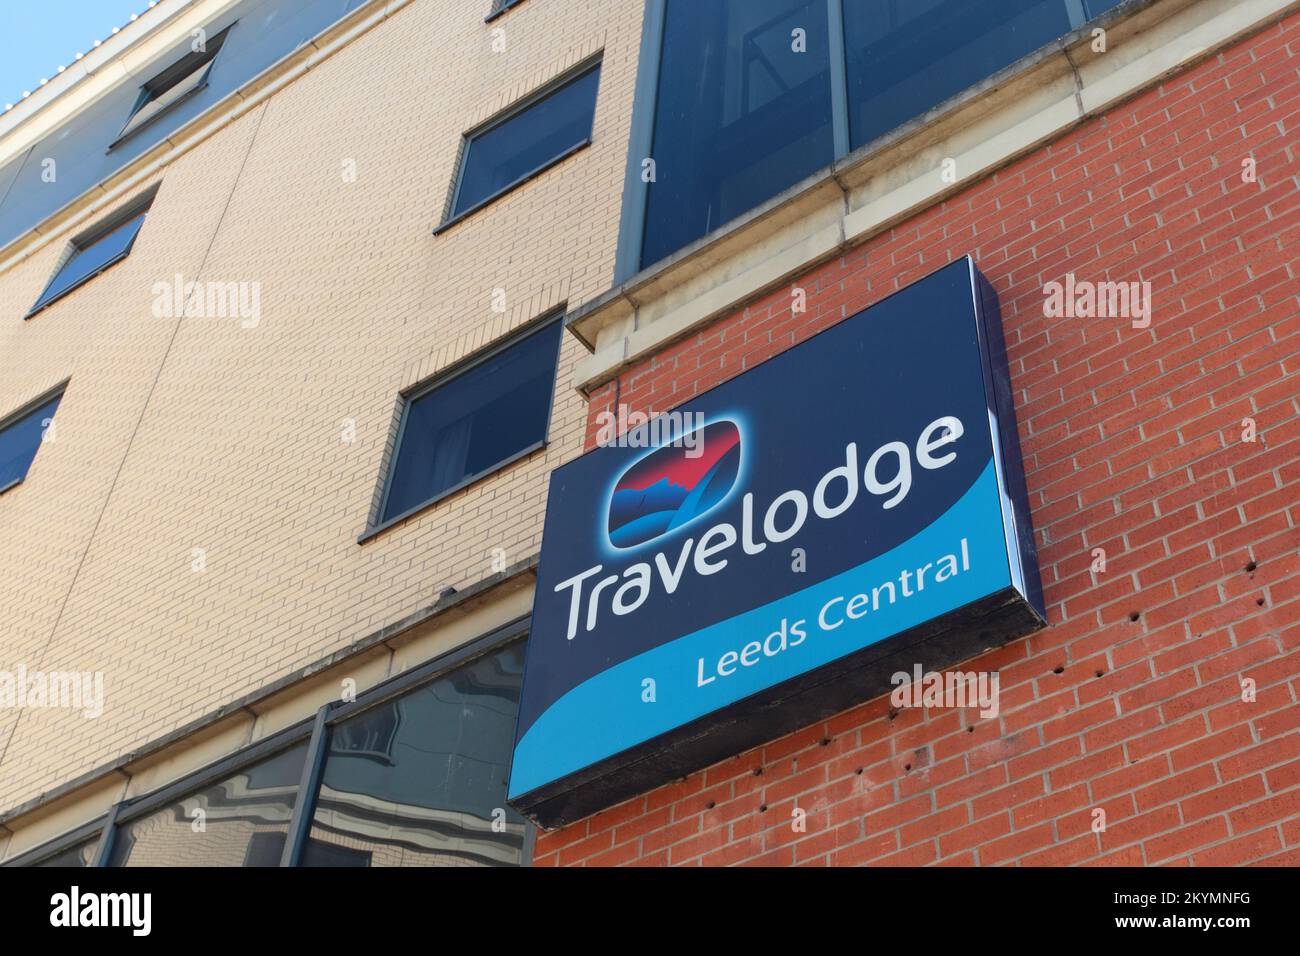 Chaophraya & Travelodge Leeds Central, Blayds Court, Blayds Yard, Off Swinegate, Leeds, LS1 4AD Stock Photo